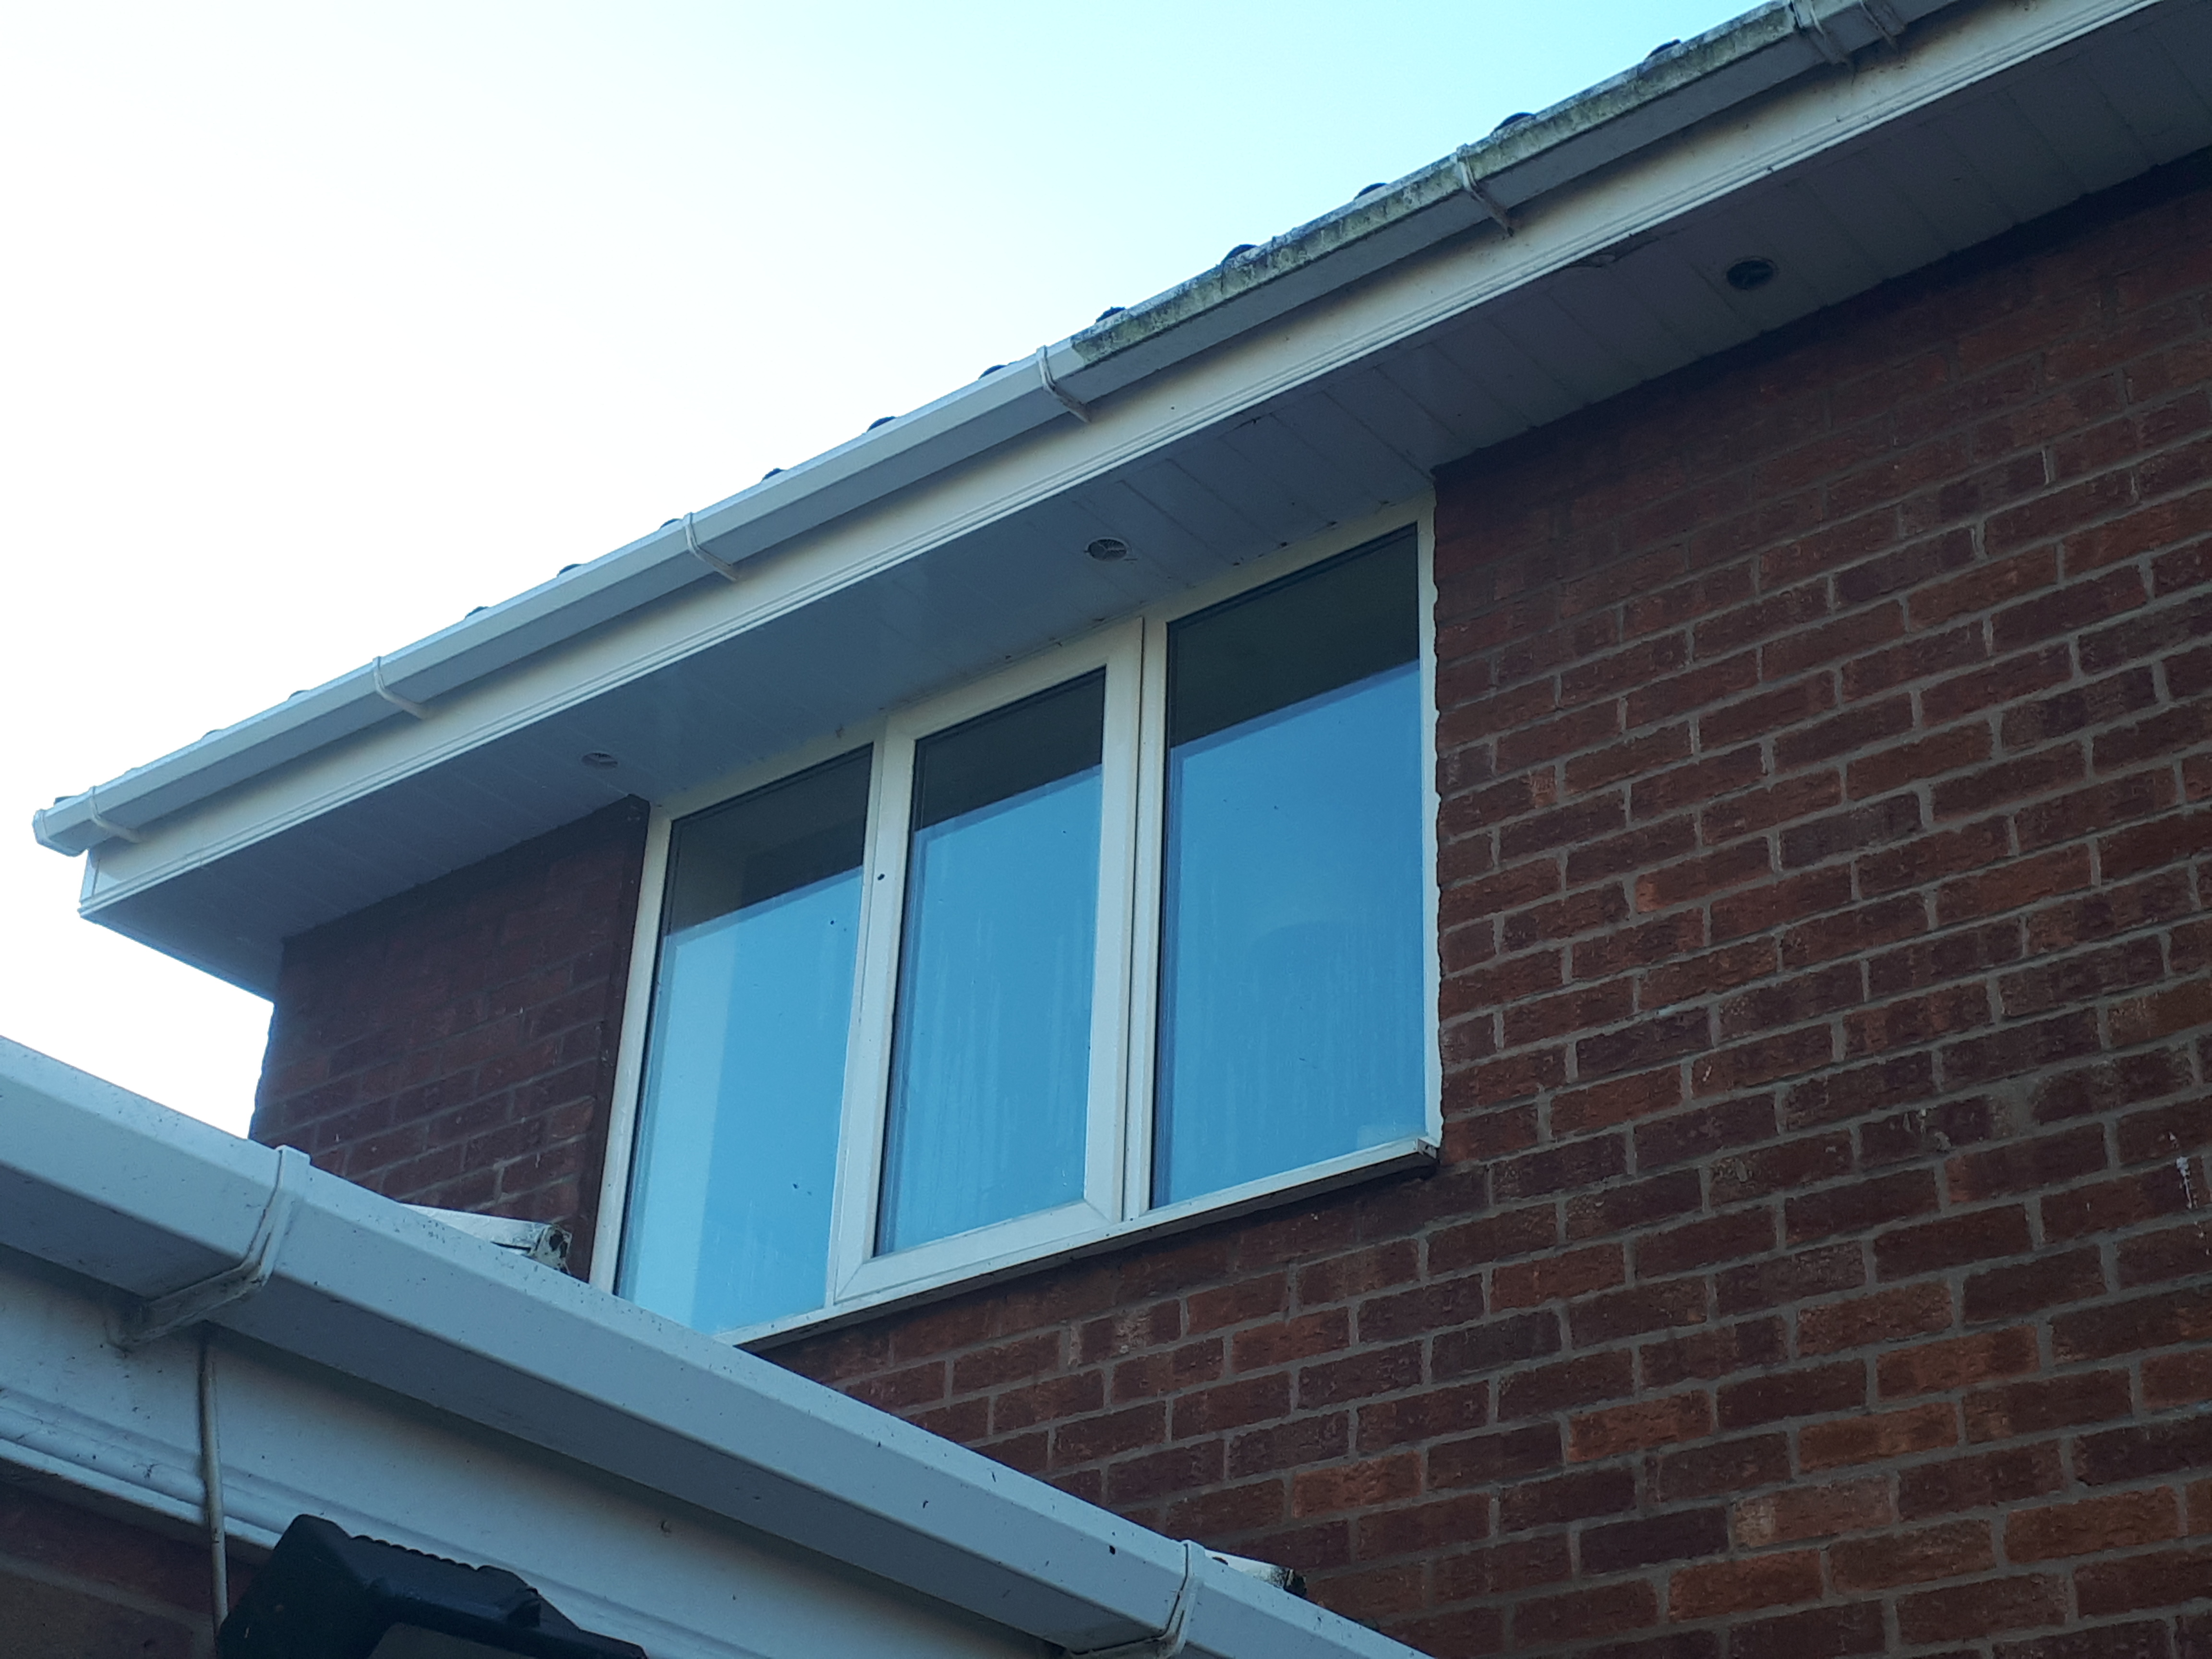 Gutter Cleaning - Fascia Cleaning - upvc Cleaned